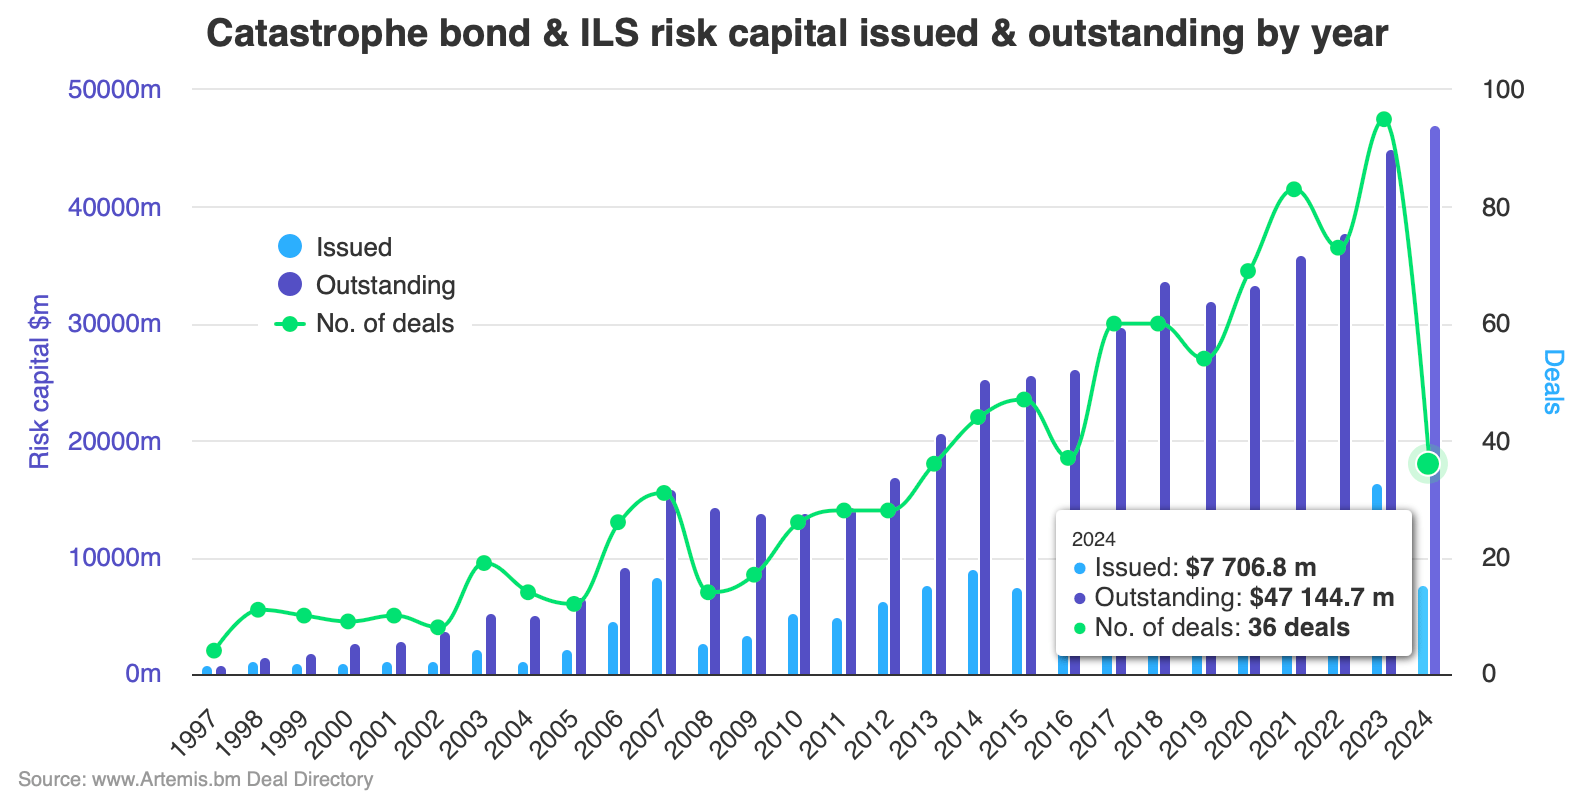 Cat bond & related ILS market hits record size at over $47bn, up 5% so far this year